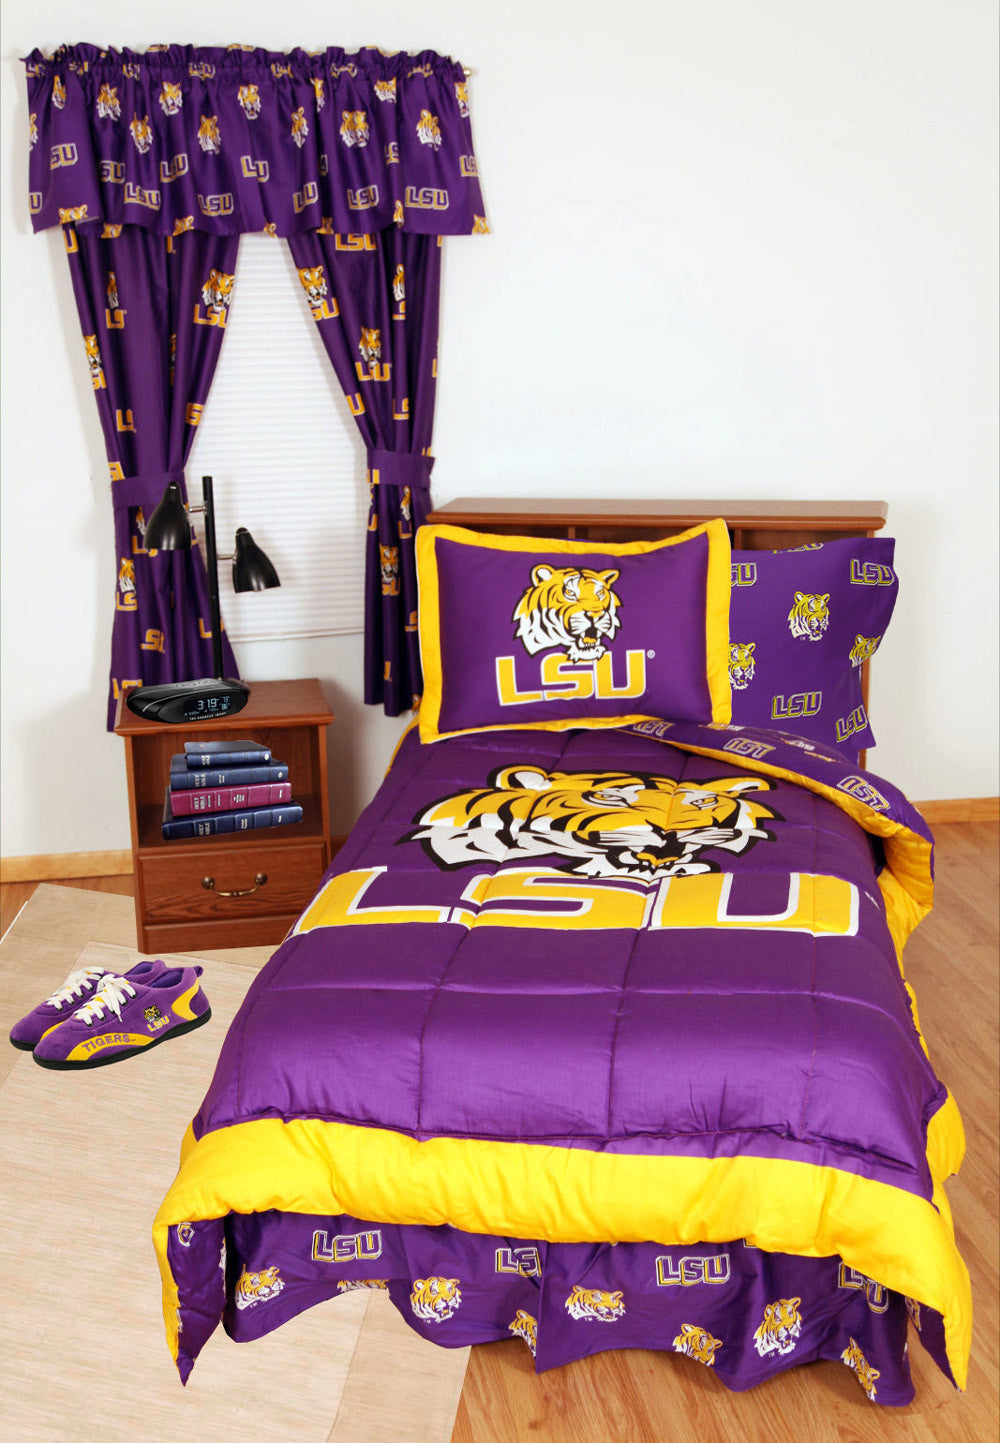 Lsu Bed In A Bag Full - With Team Colored Sheets - Lsubbfl By College Covers